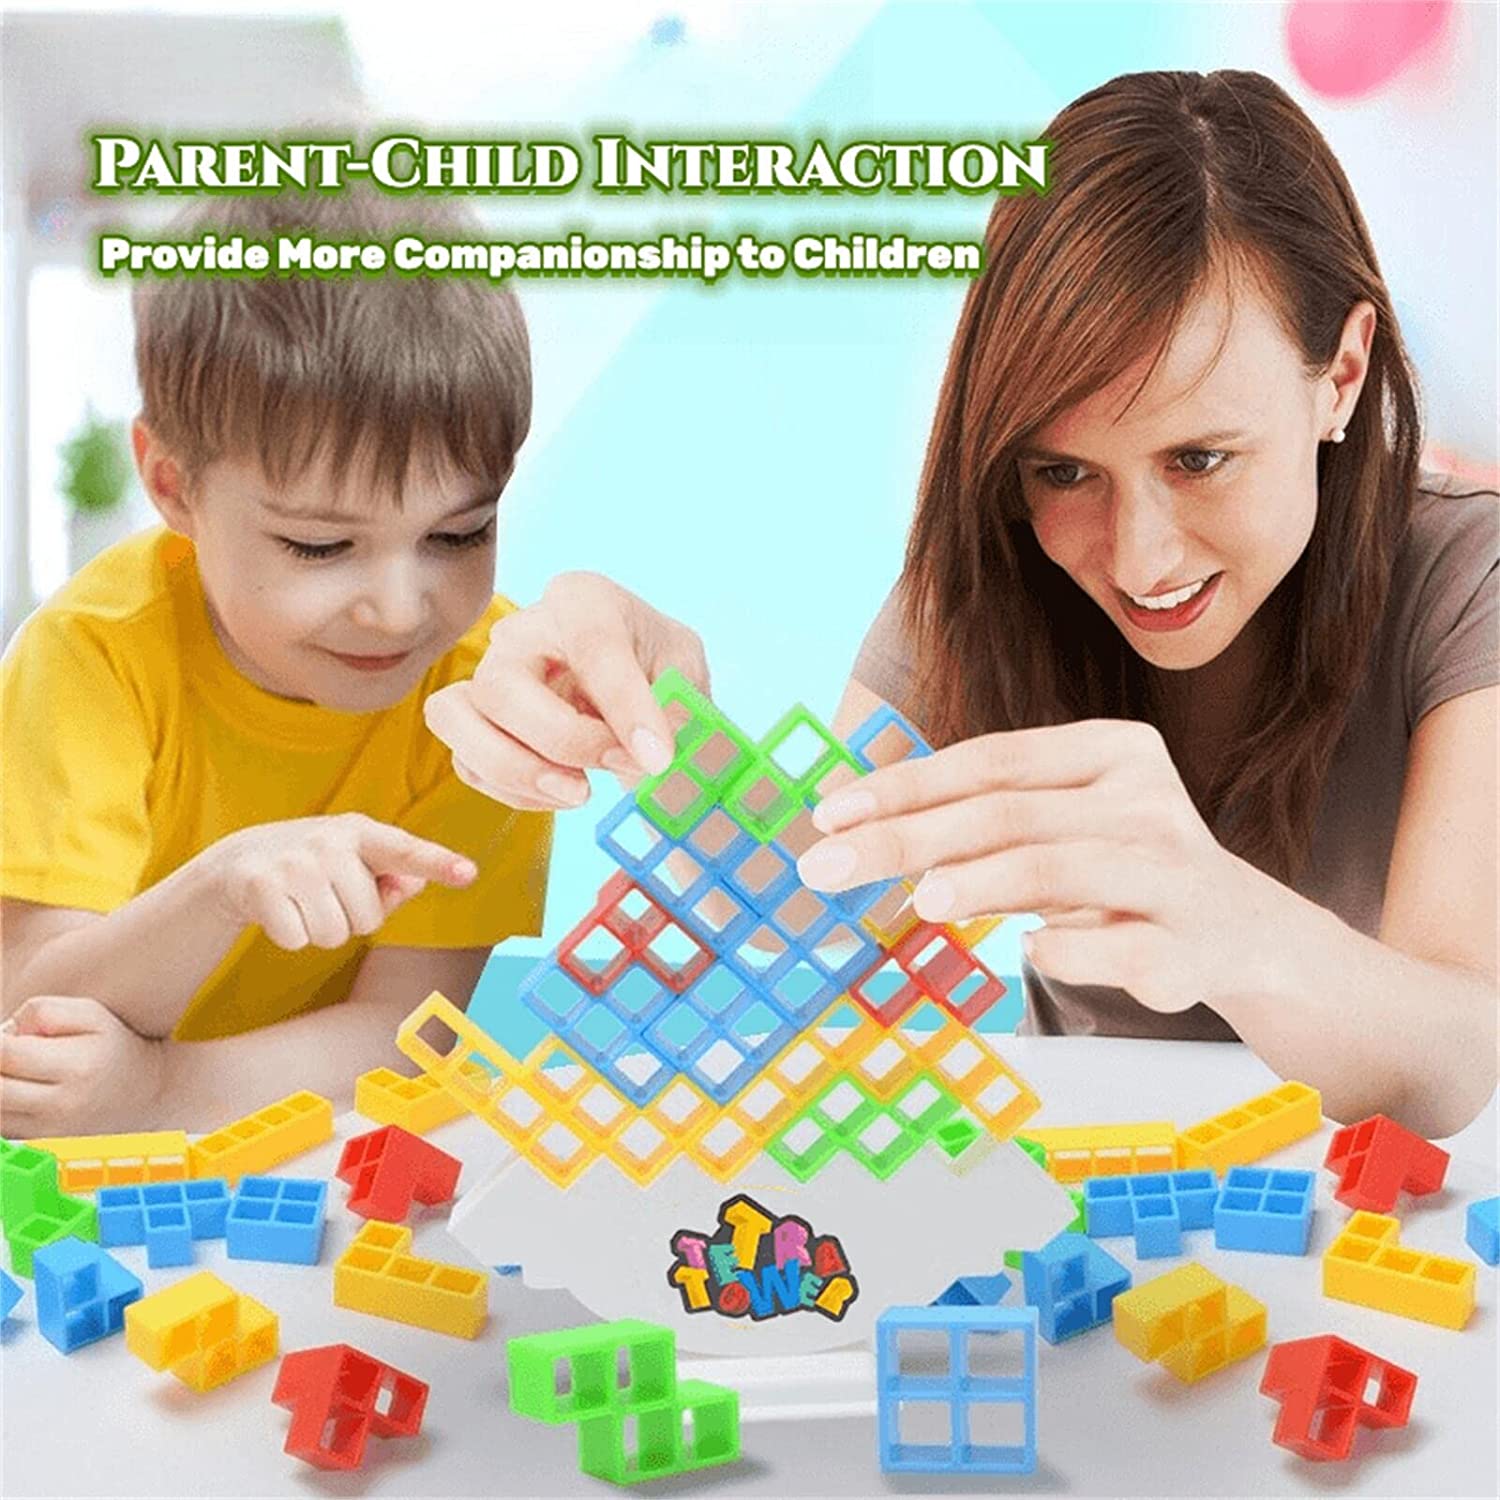 Tetra Tower Stacking Toys, Balance Game,Preschool Exercise Building Blocks, Board Games for Kids & Adults,Perfect for Family Games, Parties, Travel, (16PCS)